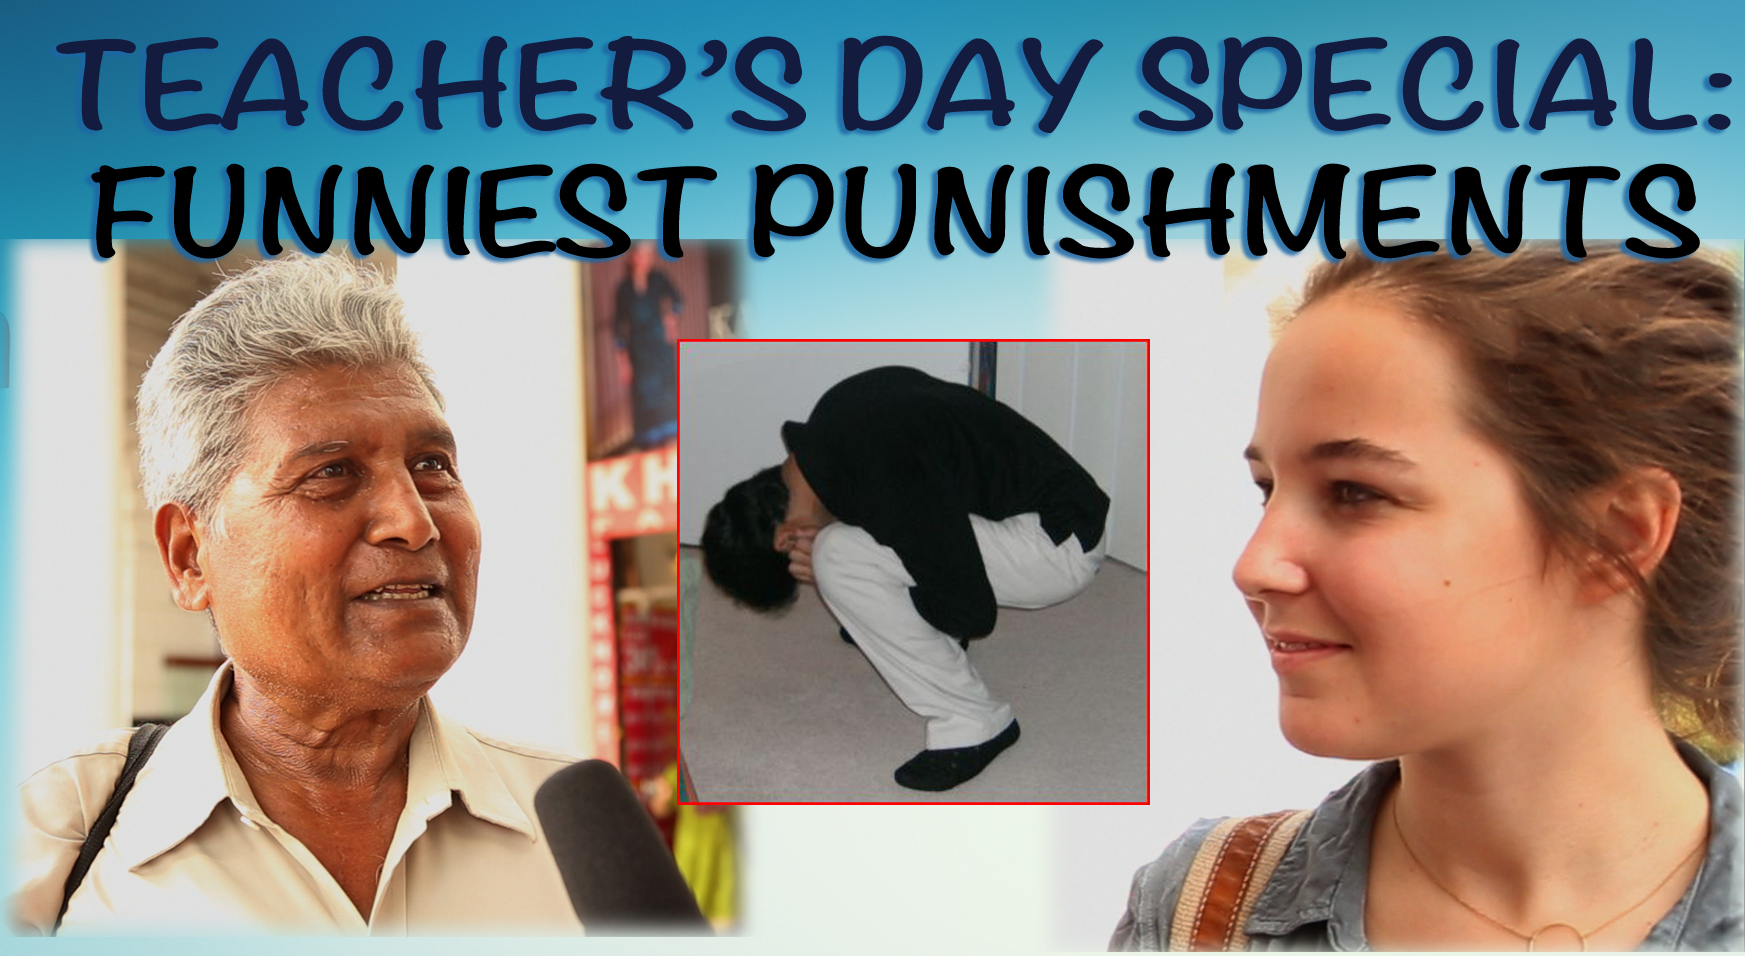 Teacher's Day Special: FUNNIEST PUNISHMENTS - TV Network